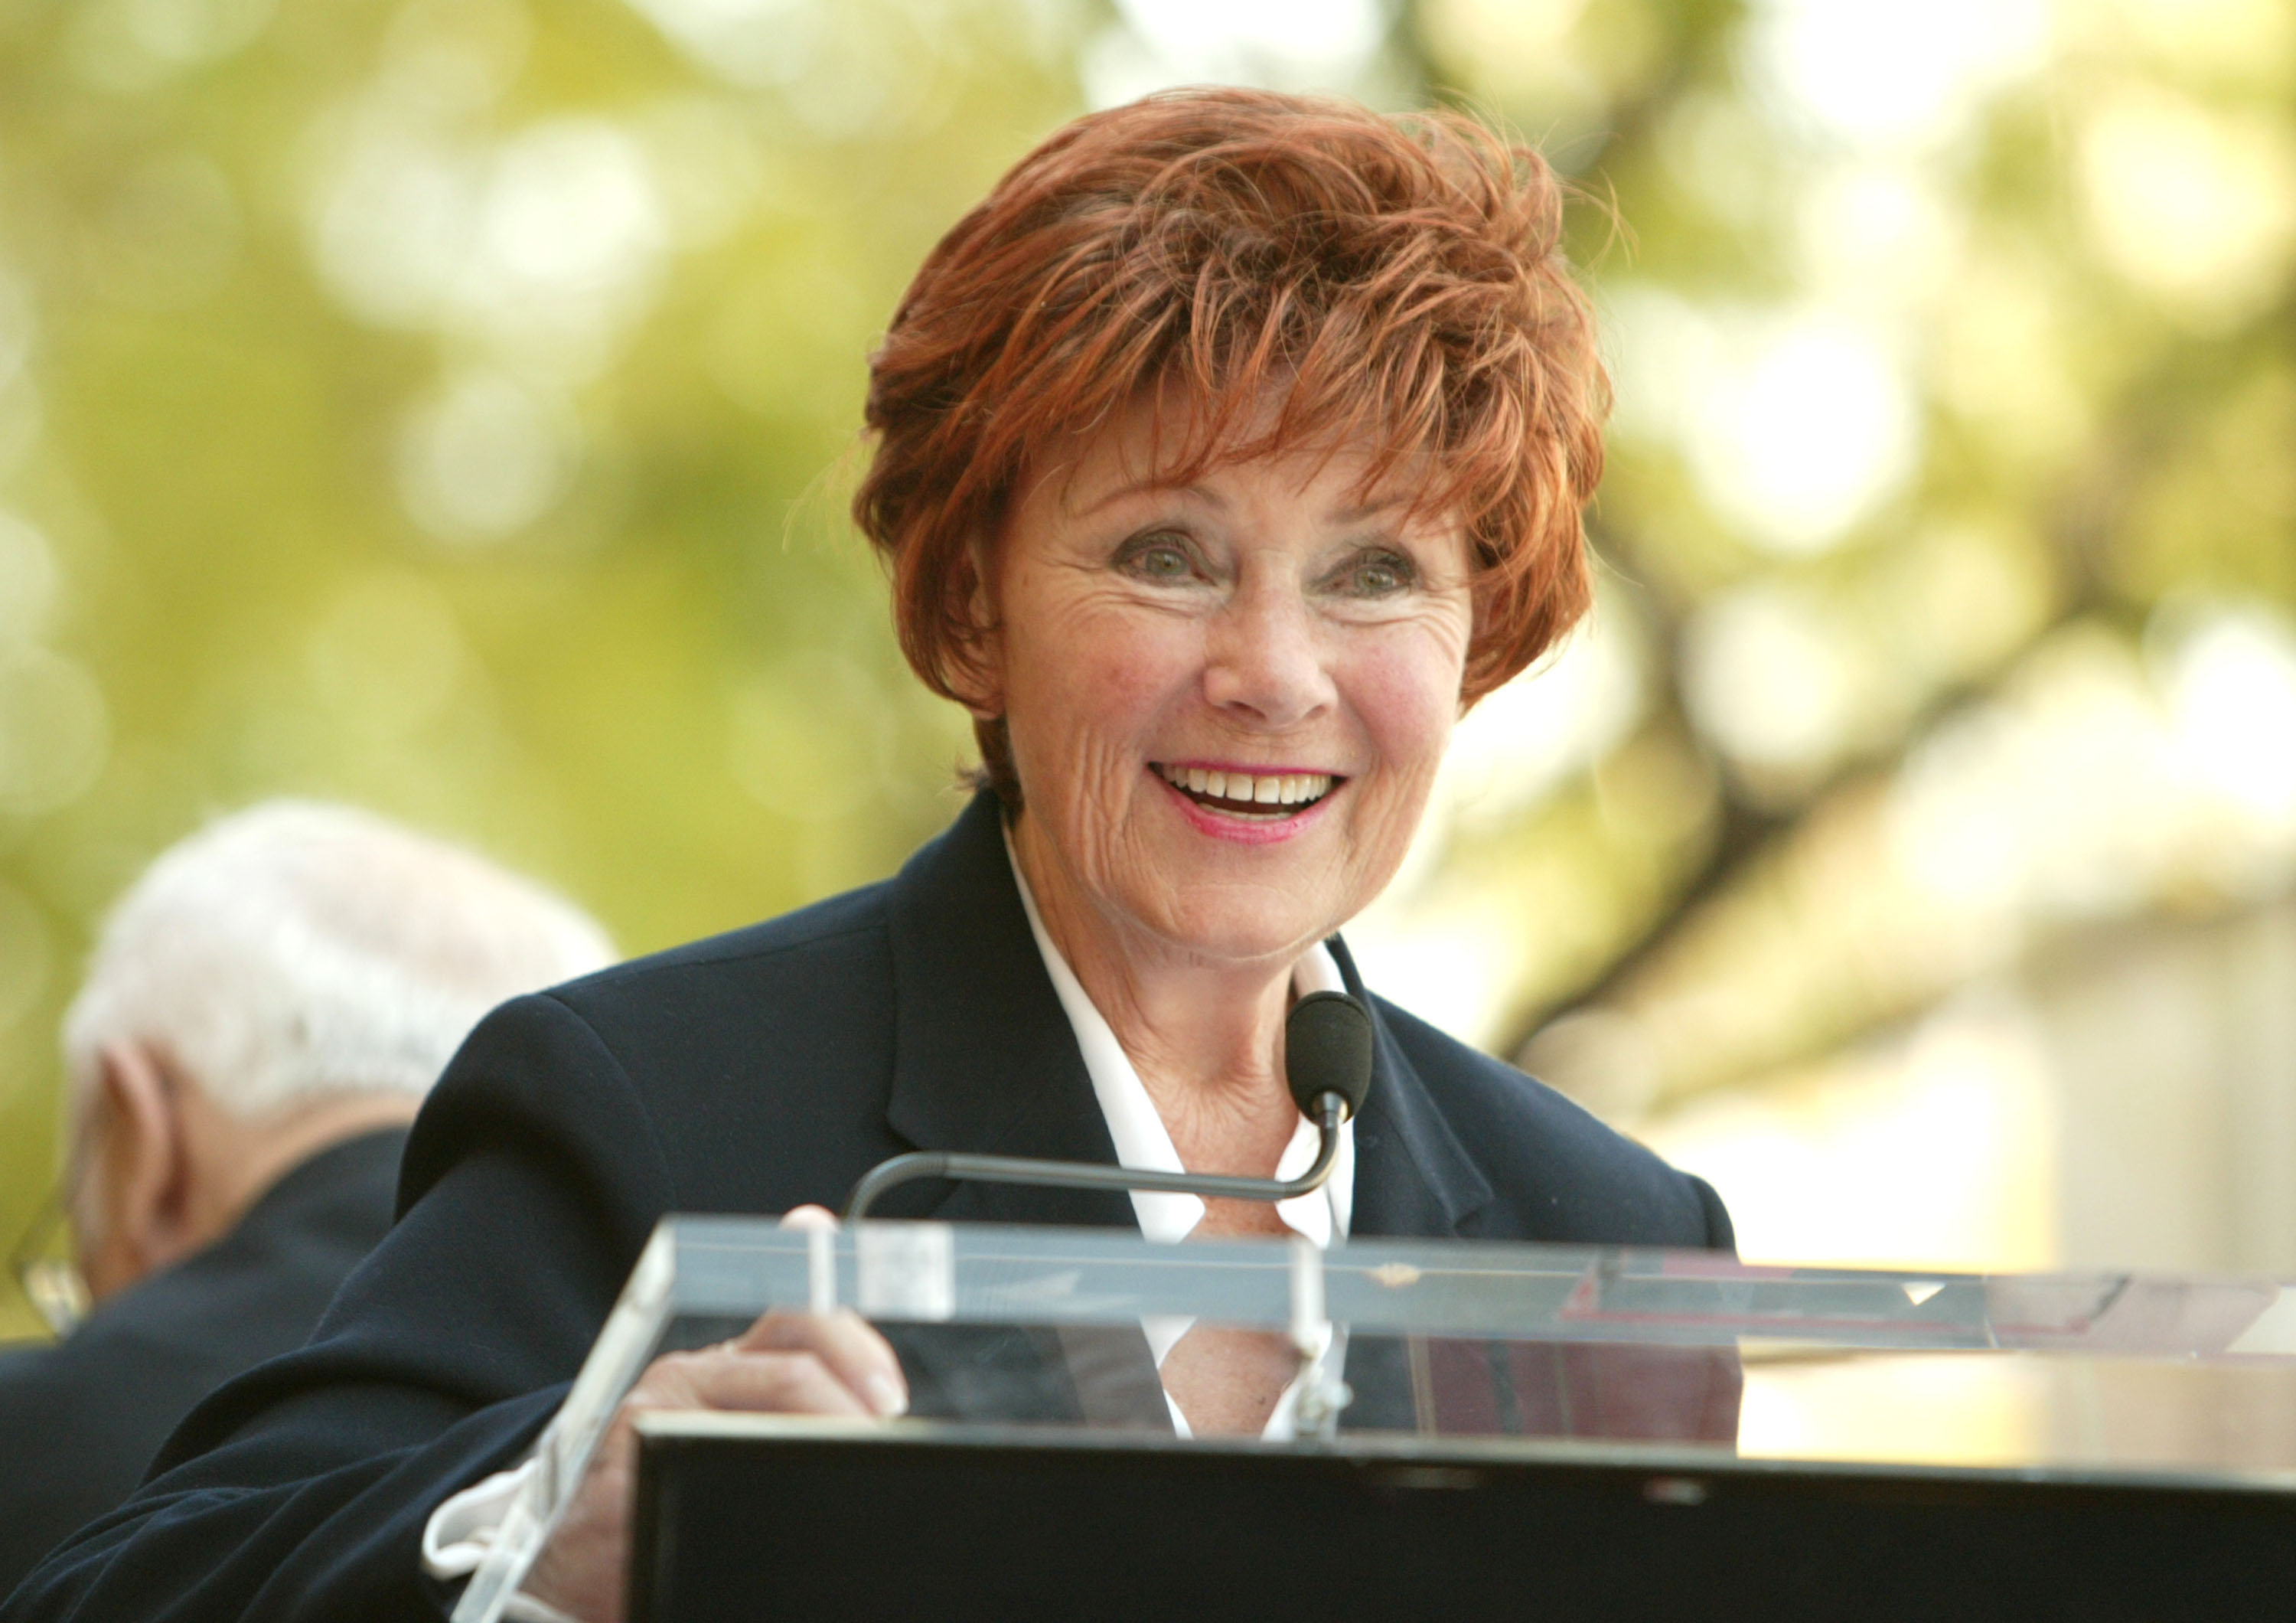 A photograph of actor Marion Ross addressing an audience from an outdoor lectern